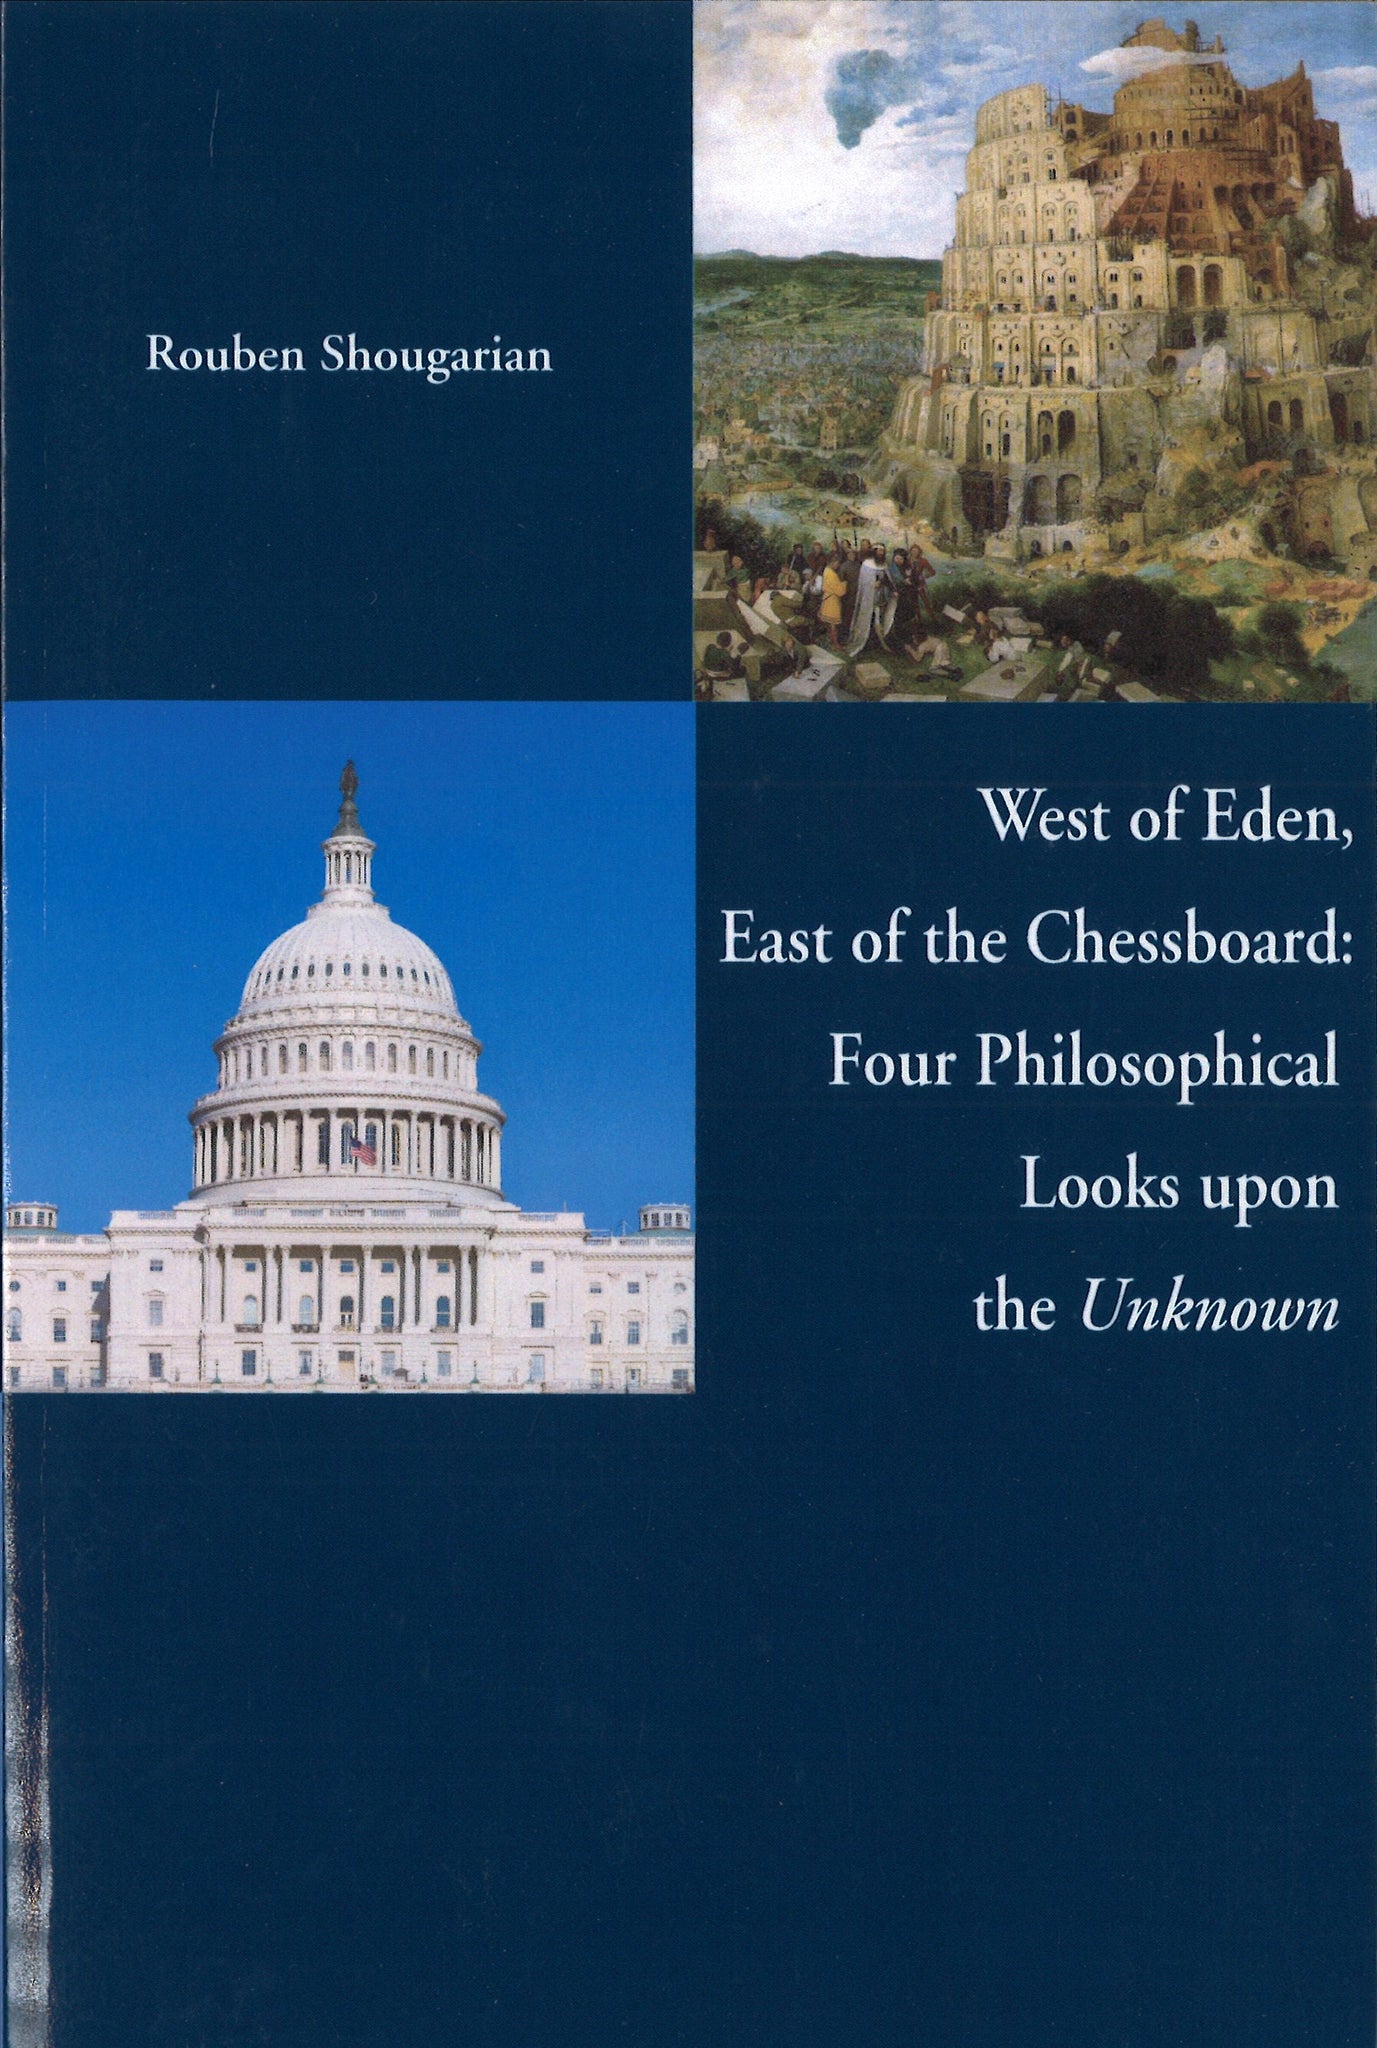 WEST OF EDEN, EAST OF THE CHESSBOARD: Four Philosophical Looks upon the unknown